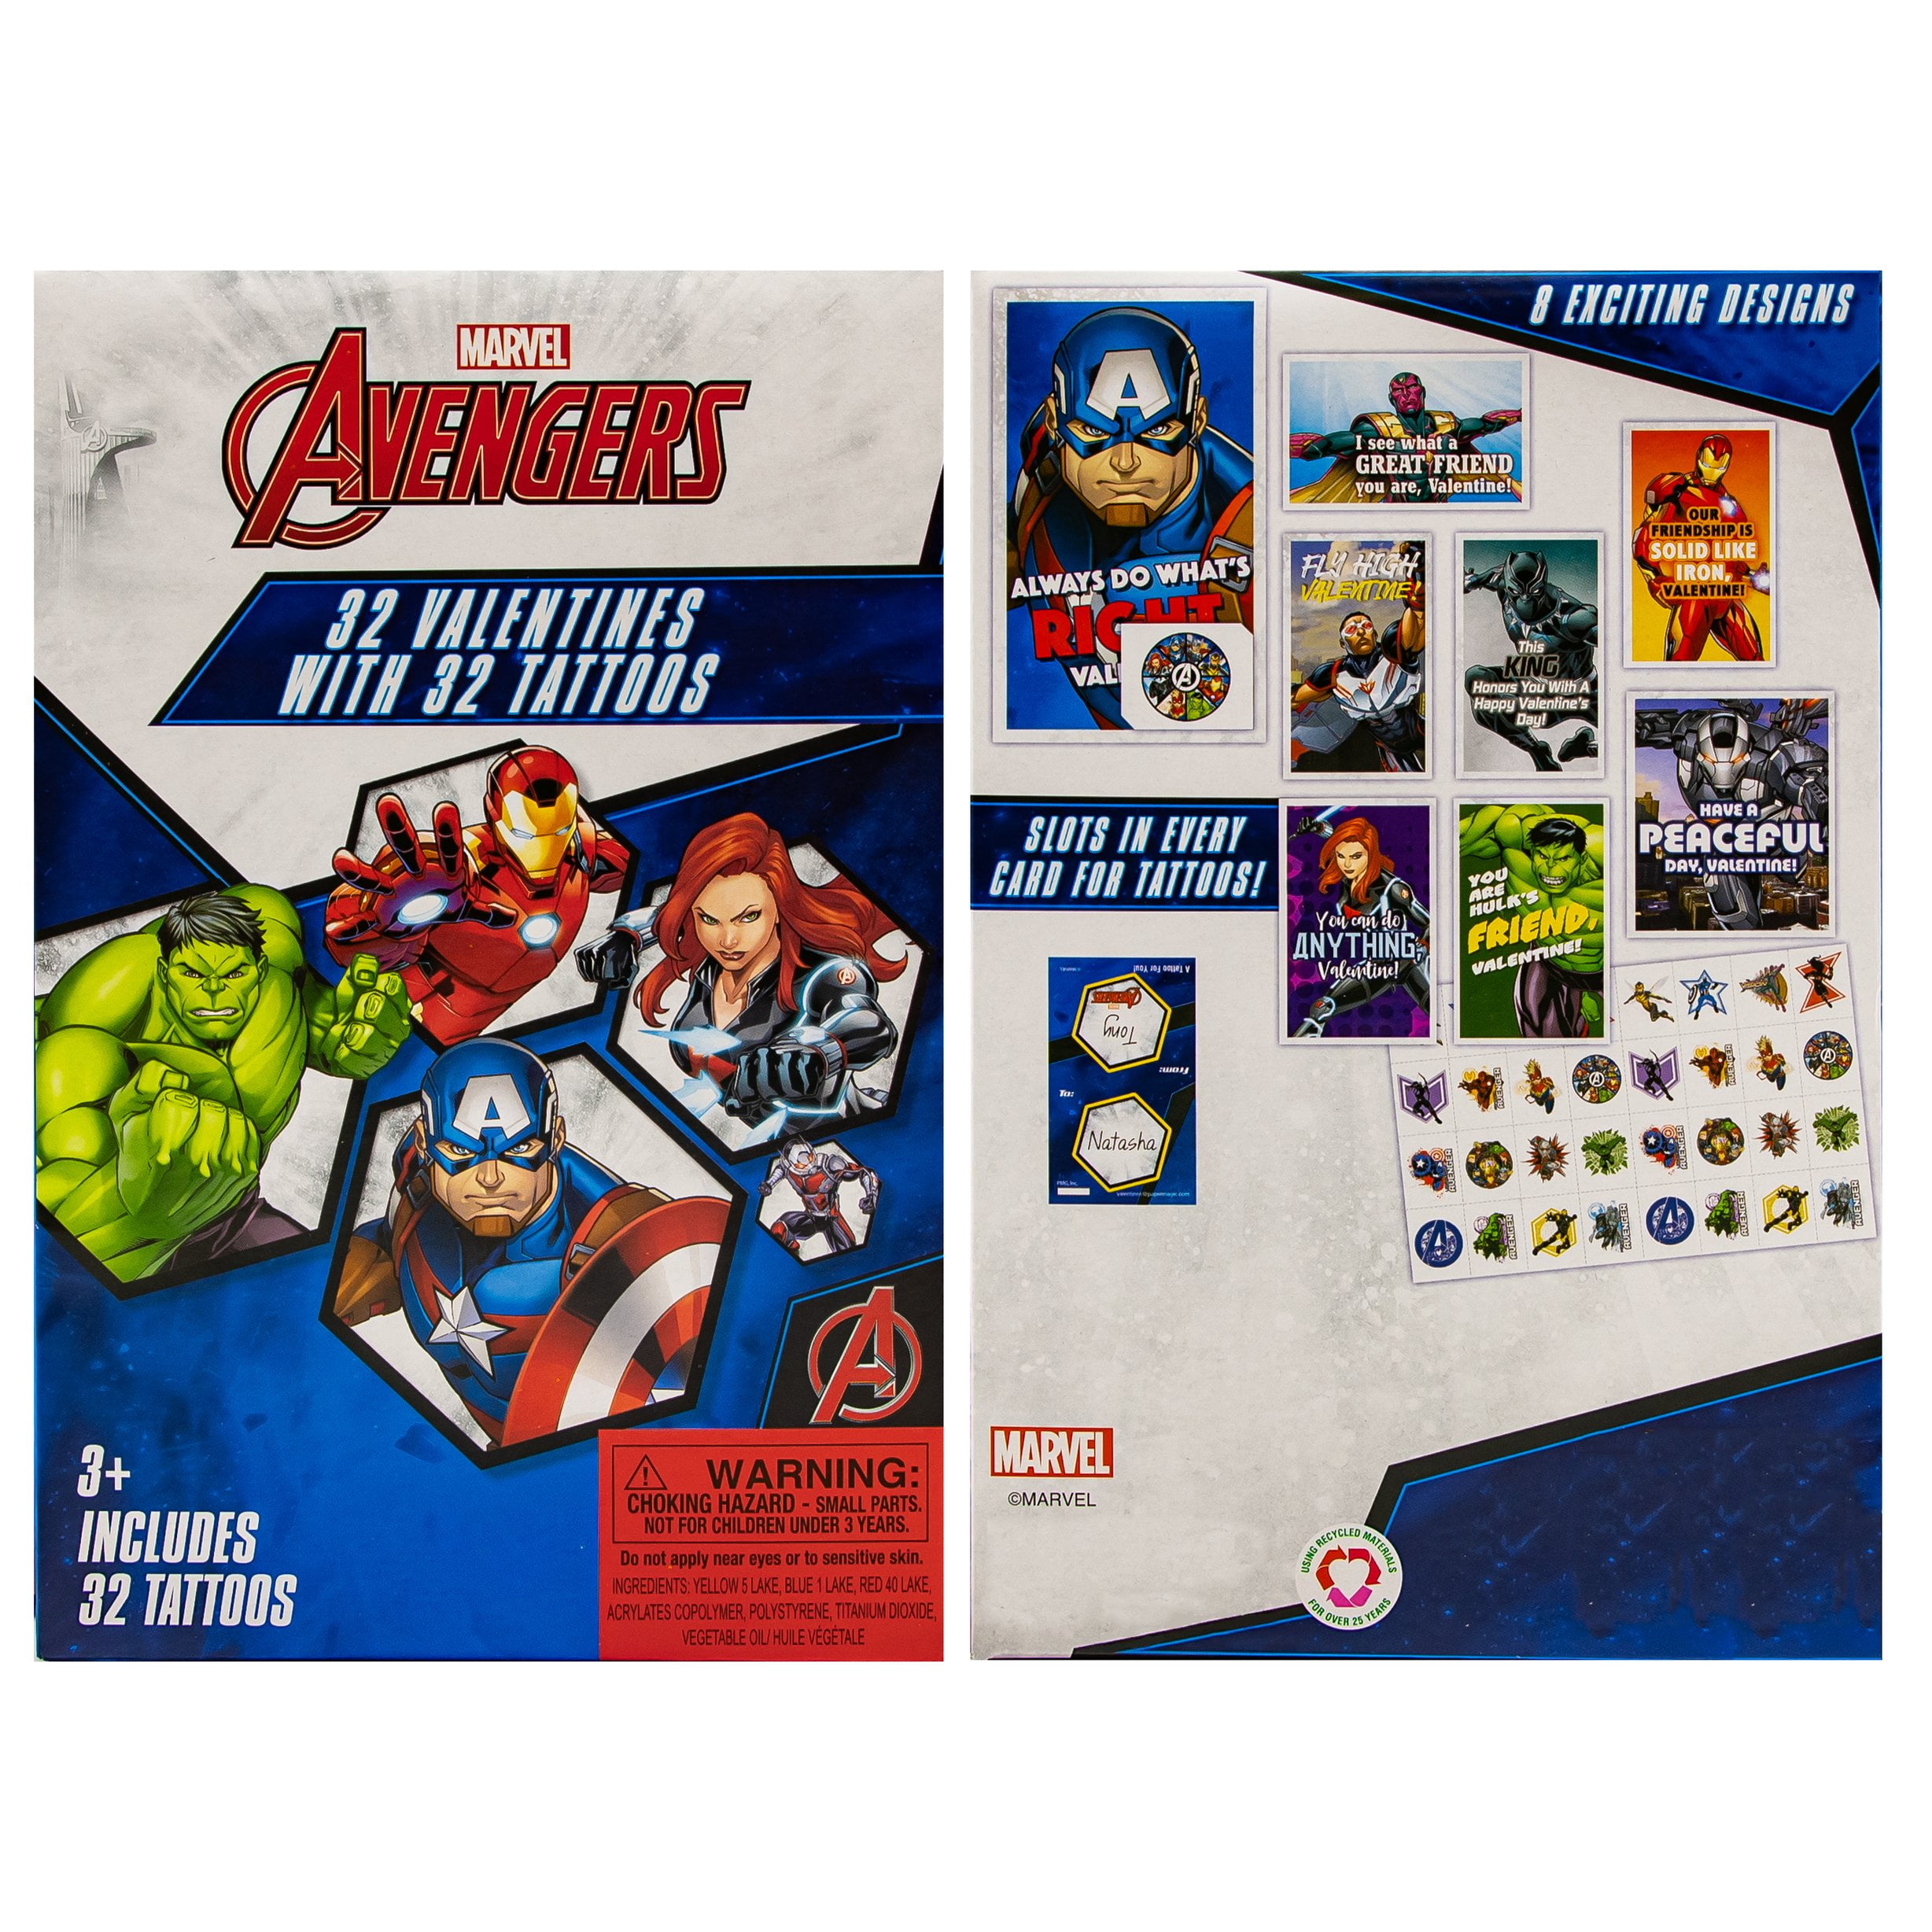 Marvel Captain America Civil War with Tattoos Valentines Day Cards Box of 32 